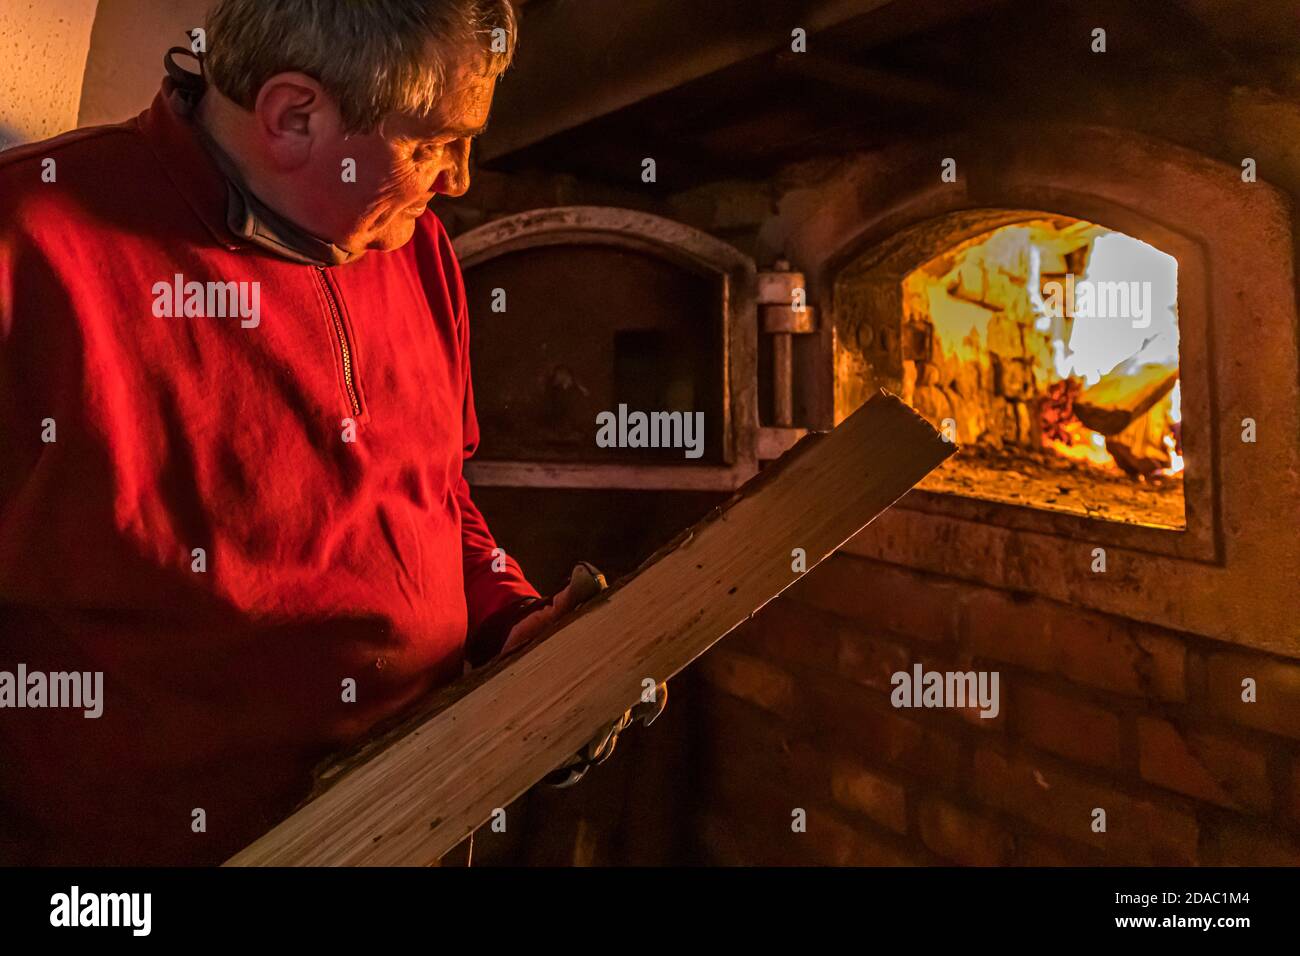 For master brewer Josef (Sepp) Neuber, the day begins with lighting up the two ovens in the old brewery. Traditional Zoigl Brewery in Falkenberg, Germany Stock Photo